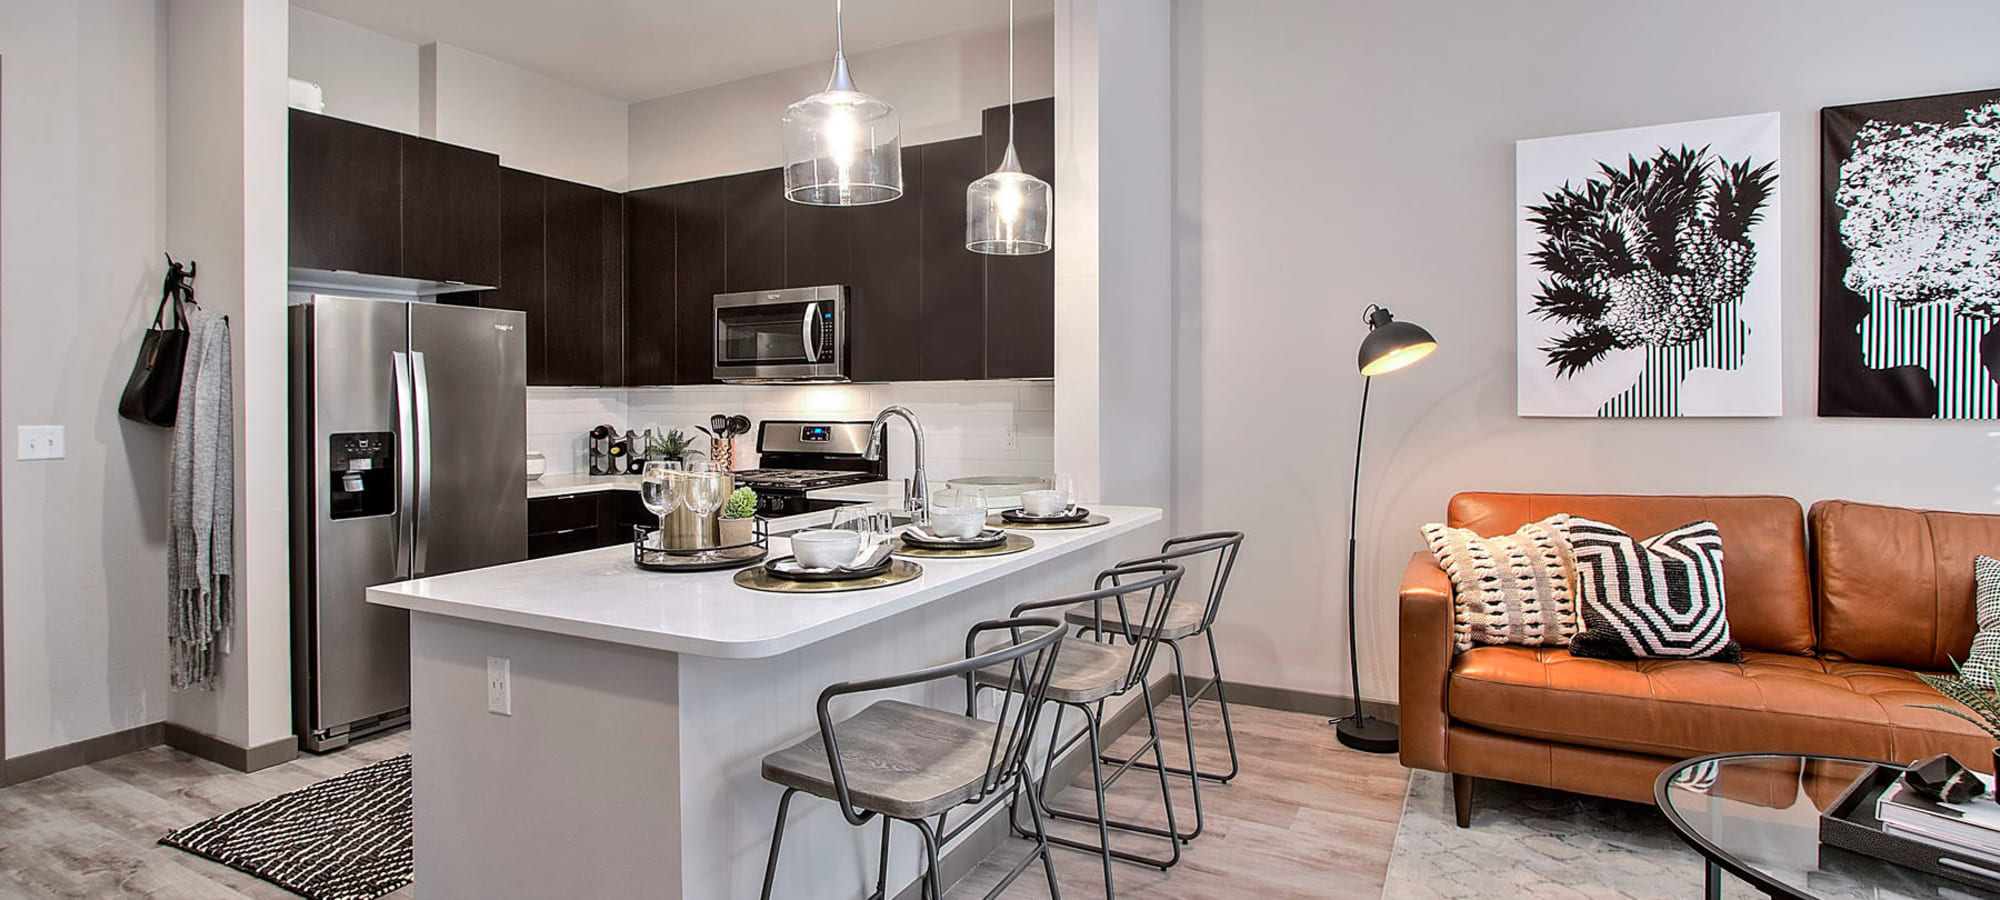 Model apartment's kitchen with an island and bar seating at Jade Apartments in Las Vegas, Nevada